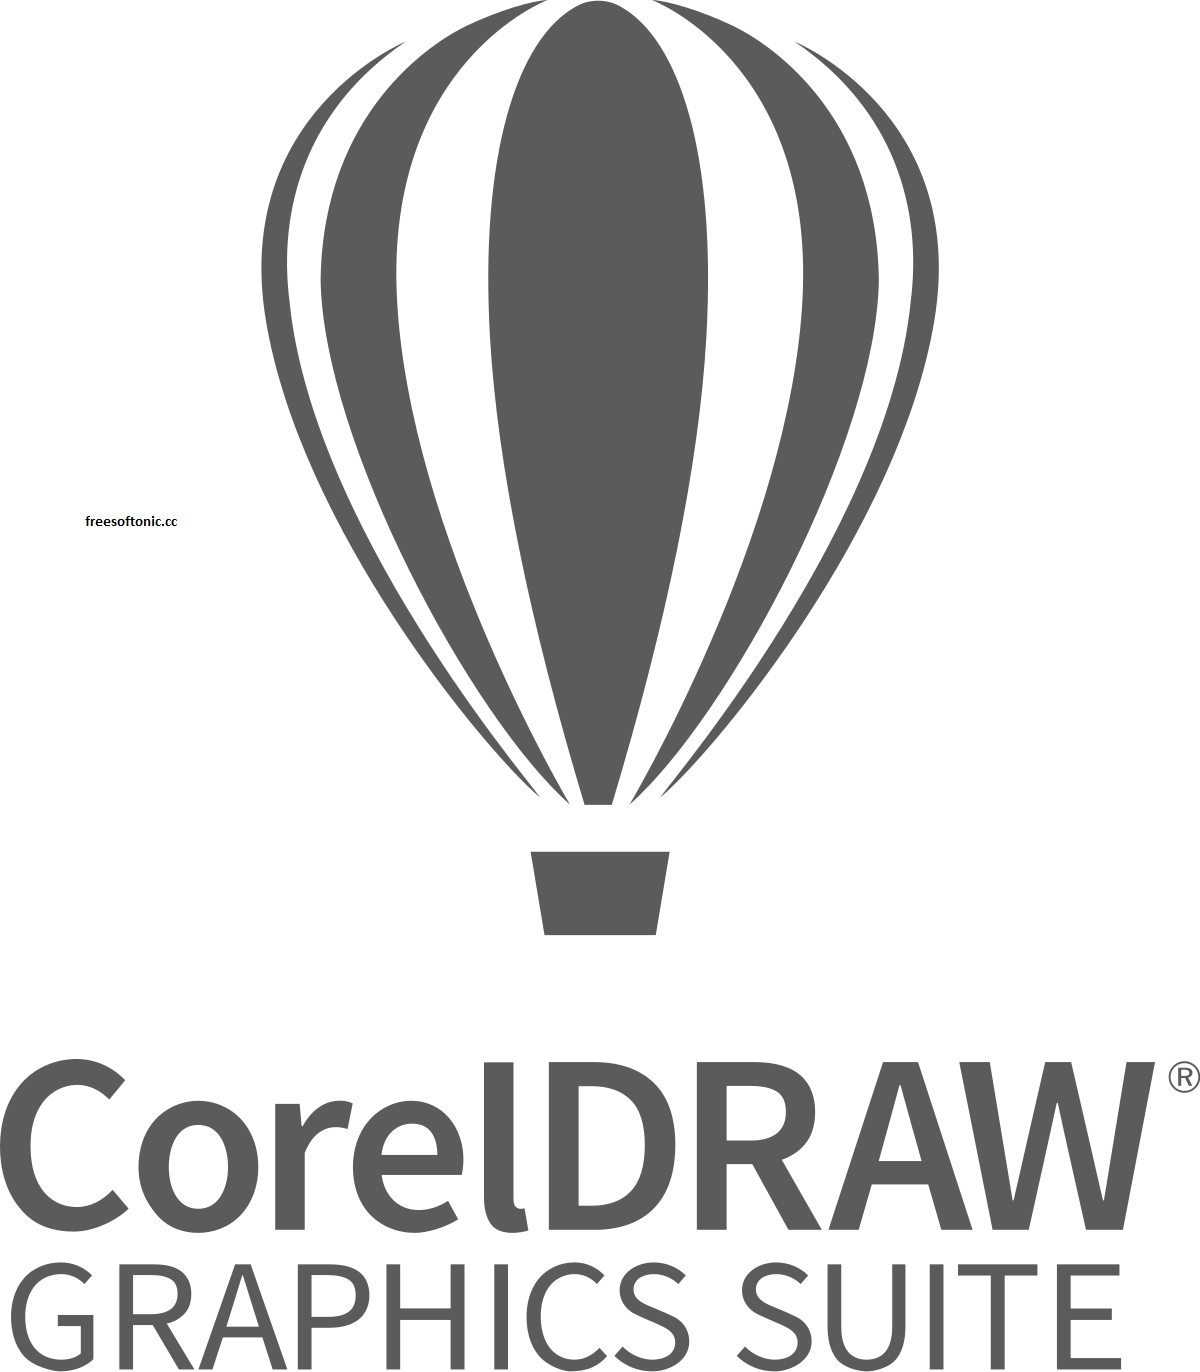 coreldraw full version free download with crack